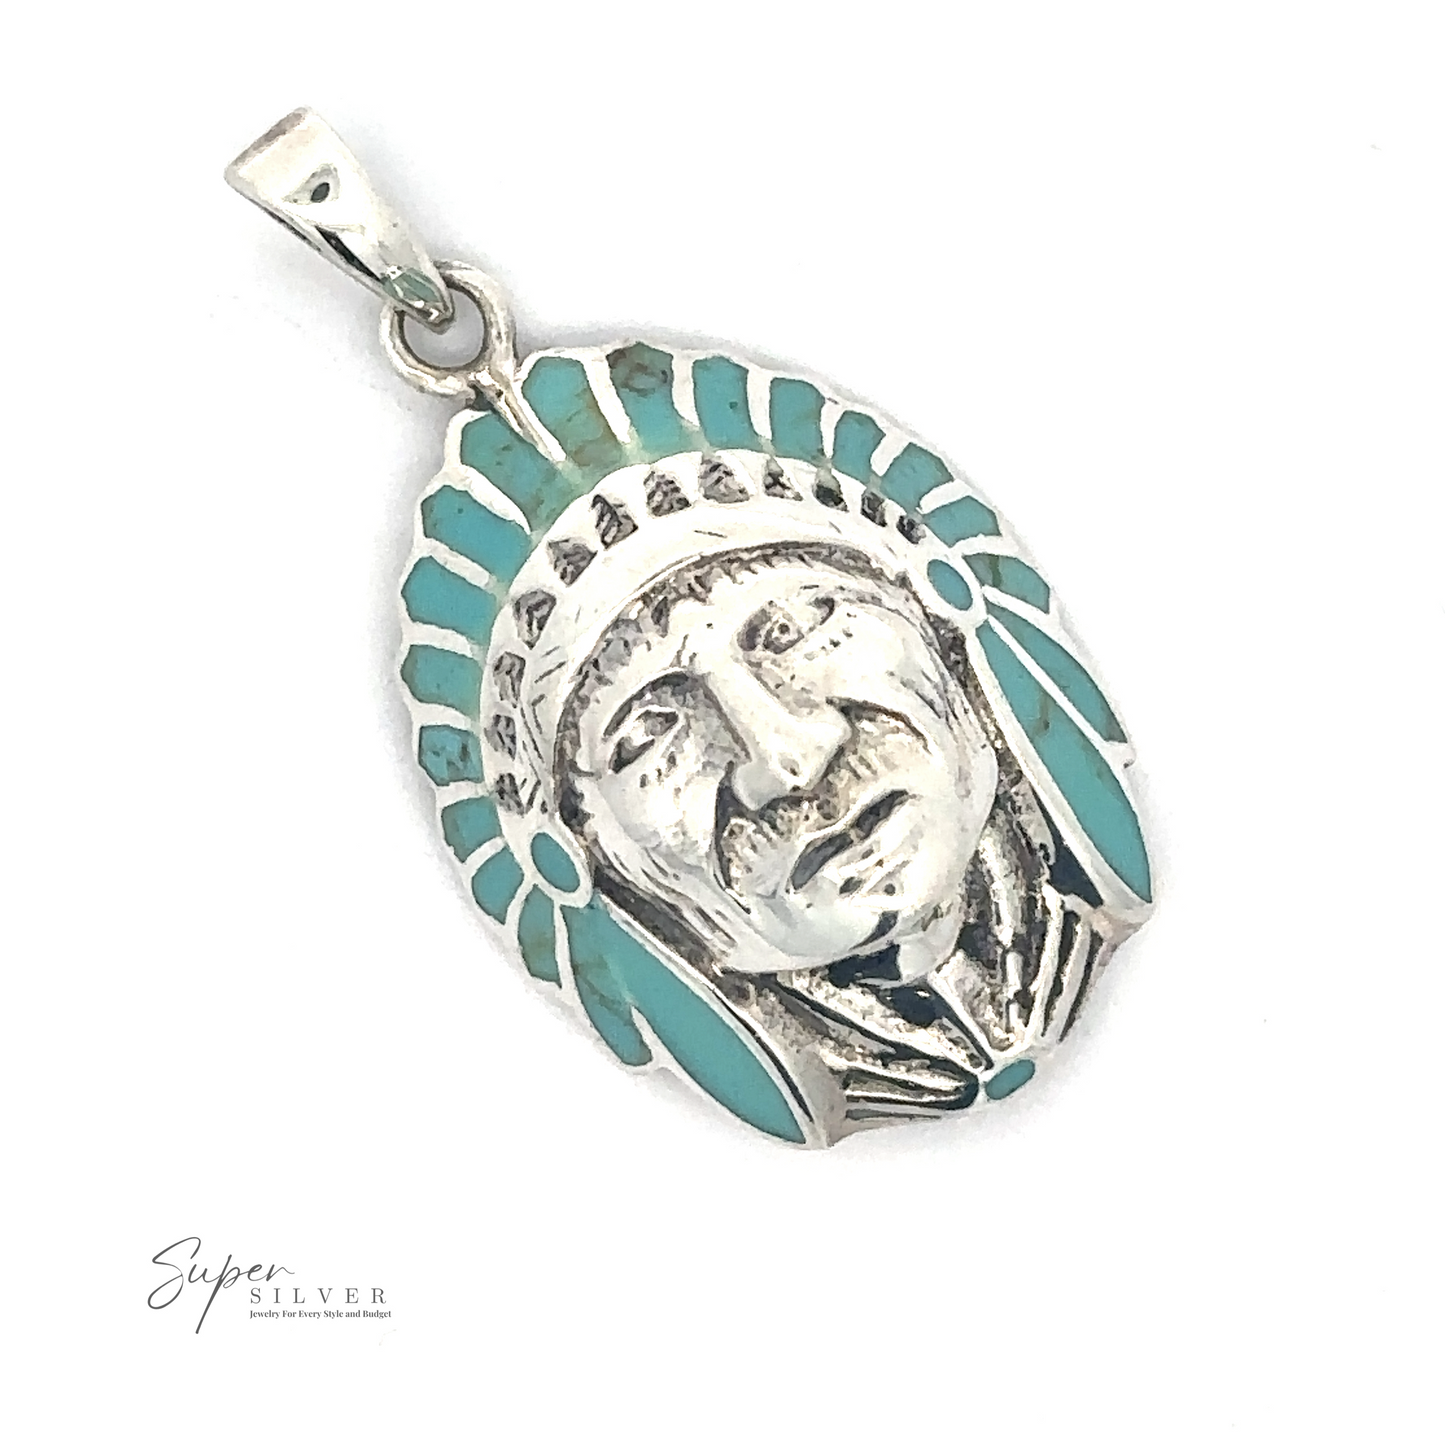 
                  
                    A stunning silver pendant featuring a detailed face adorned with a feathered headpiece and teal accents, this Turquoise Chief Head Pendant incorporates turquoise stones. The "Super Silver" logo is elegantly displayed in the bottom left corner.
                  
                